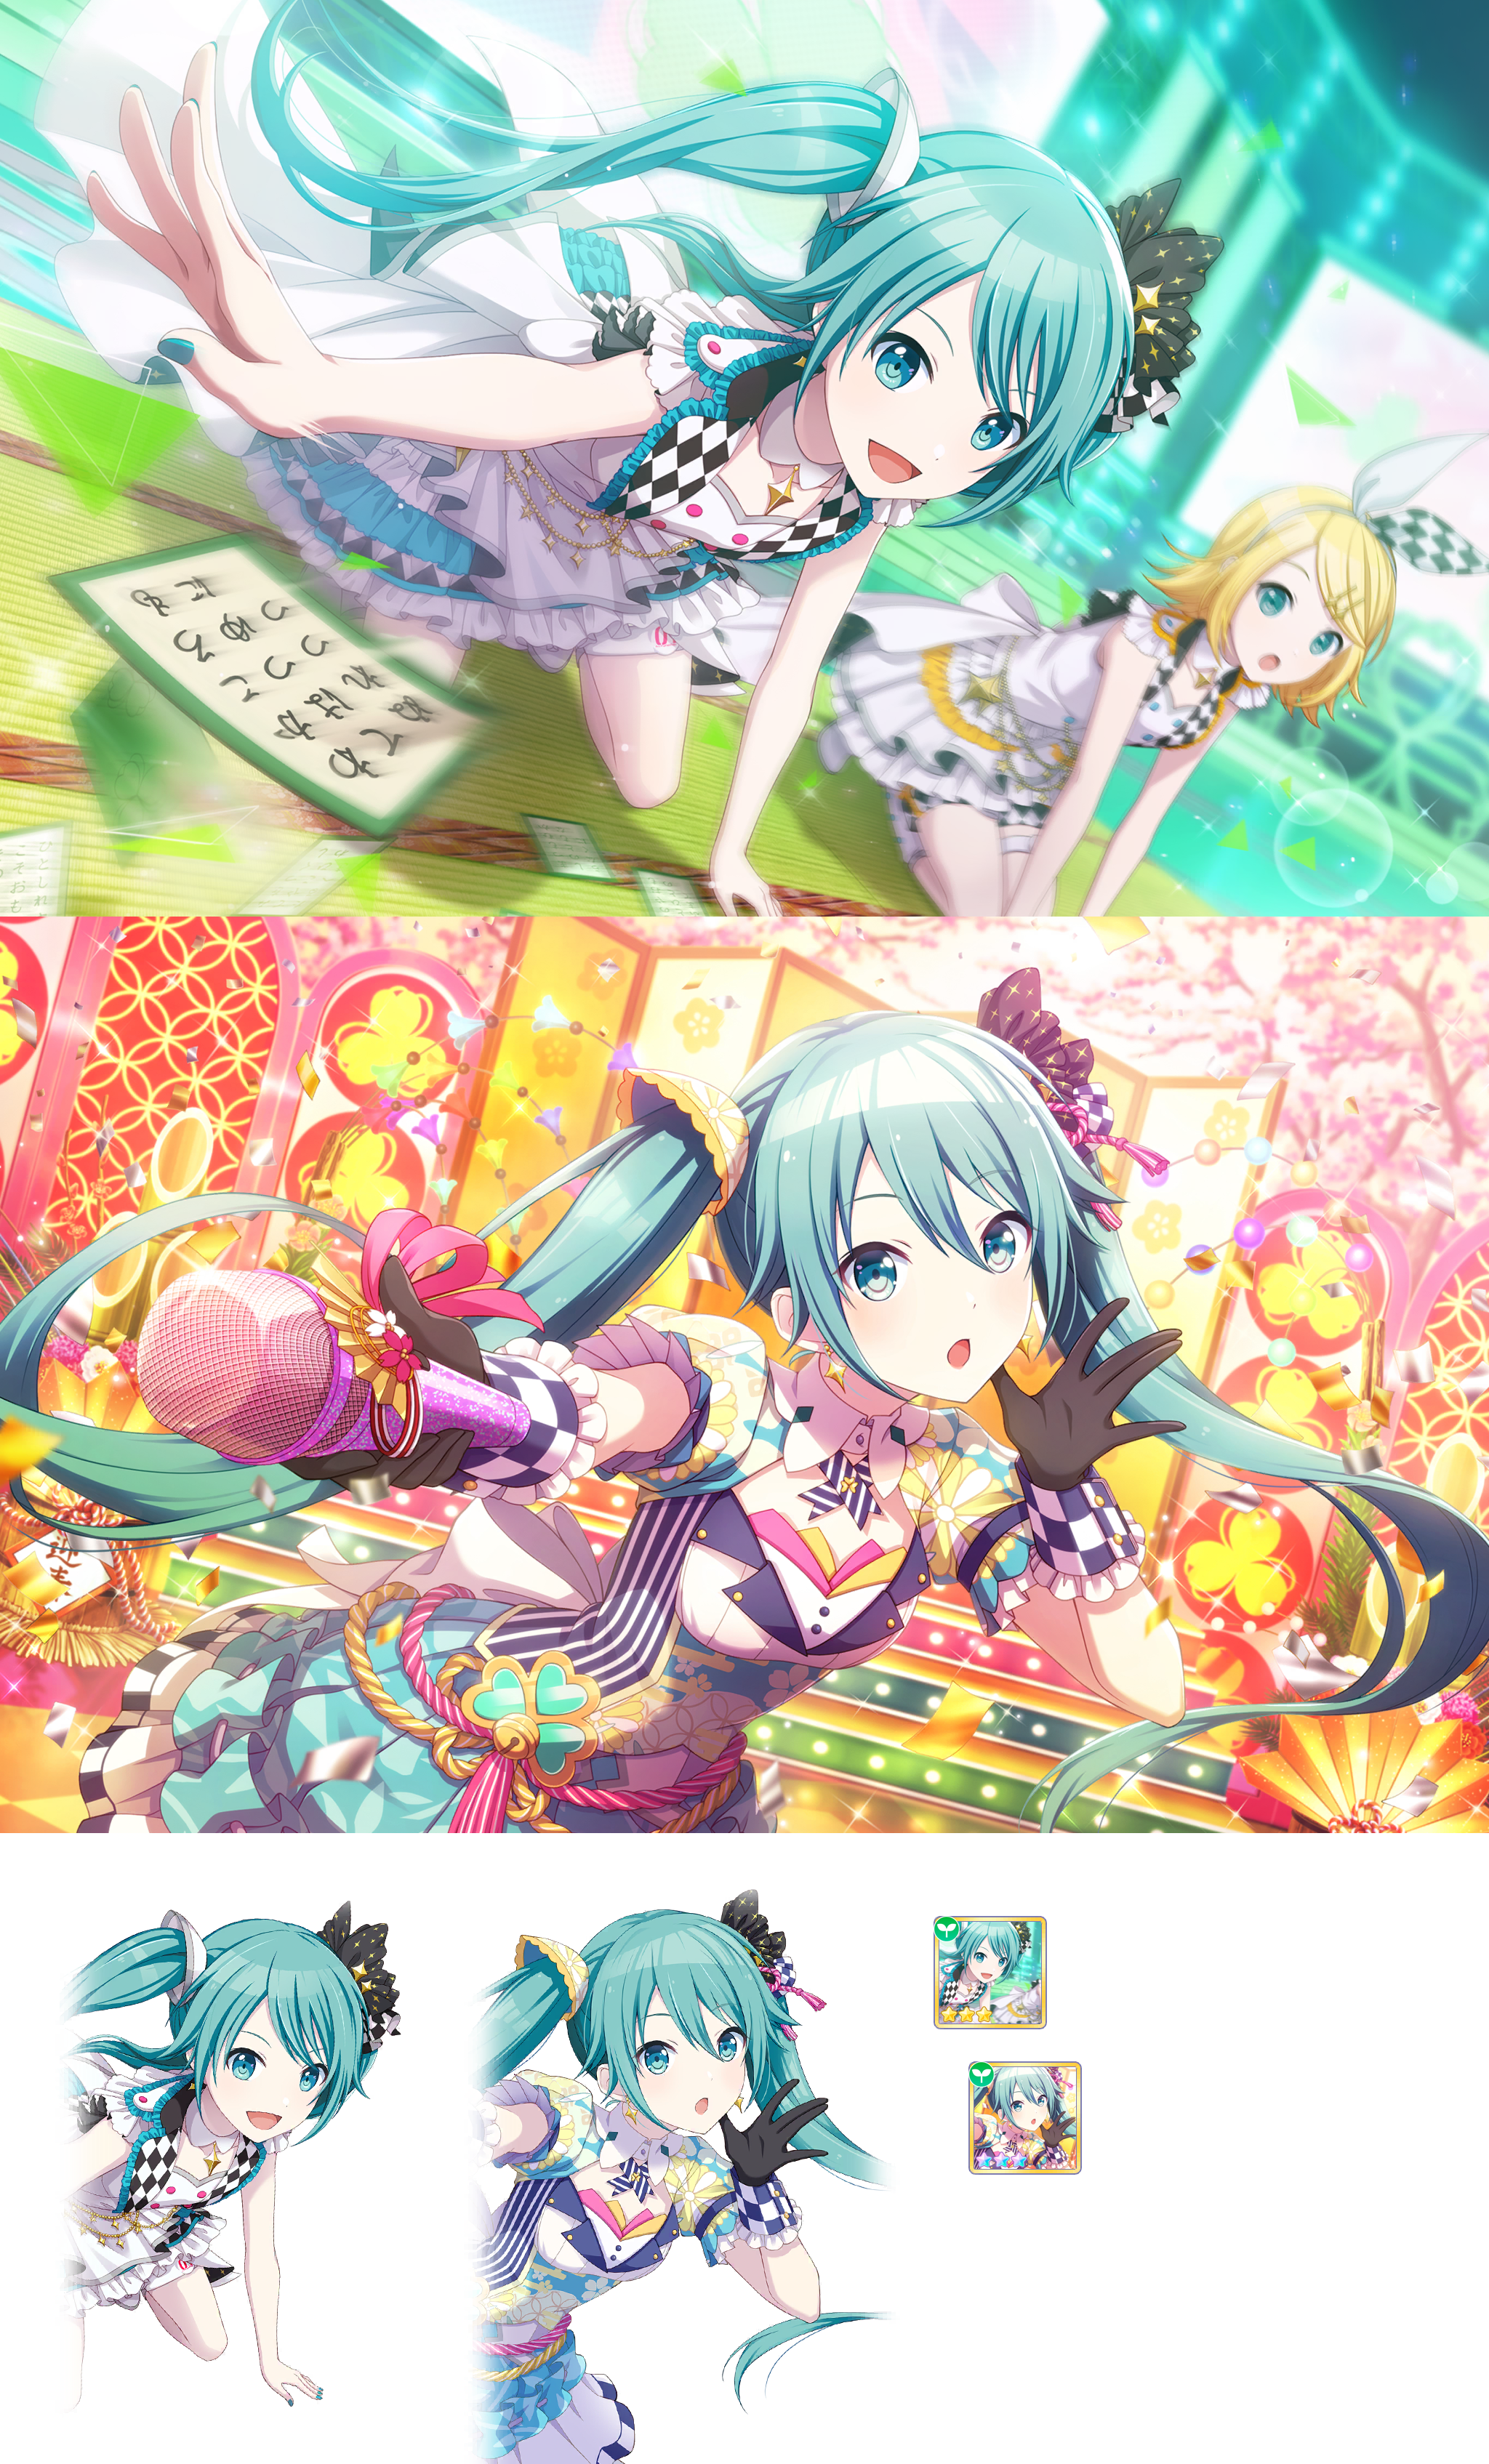 Project SEKAI COLORFUL STAGE! feat. Hatsune Miku - The Top Idol of the Karuta World?